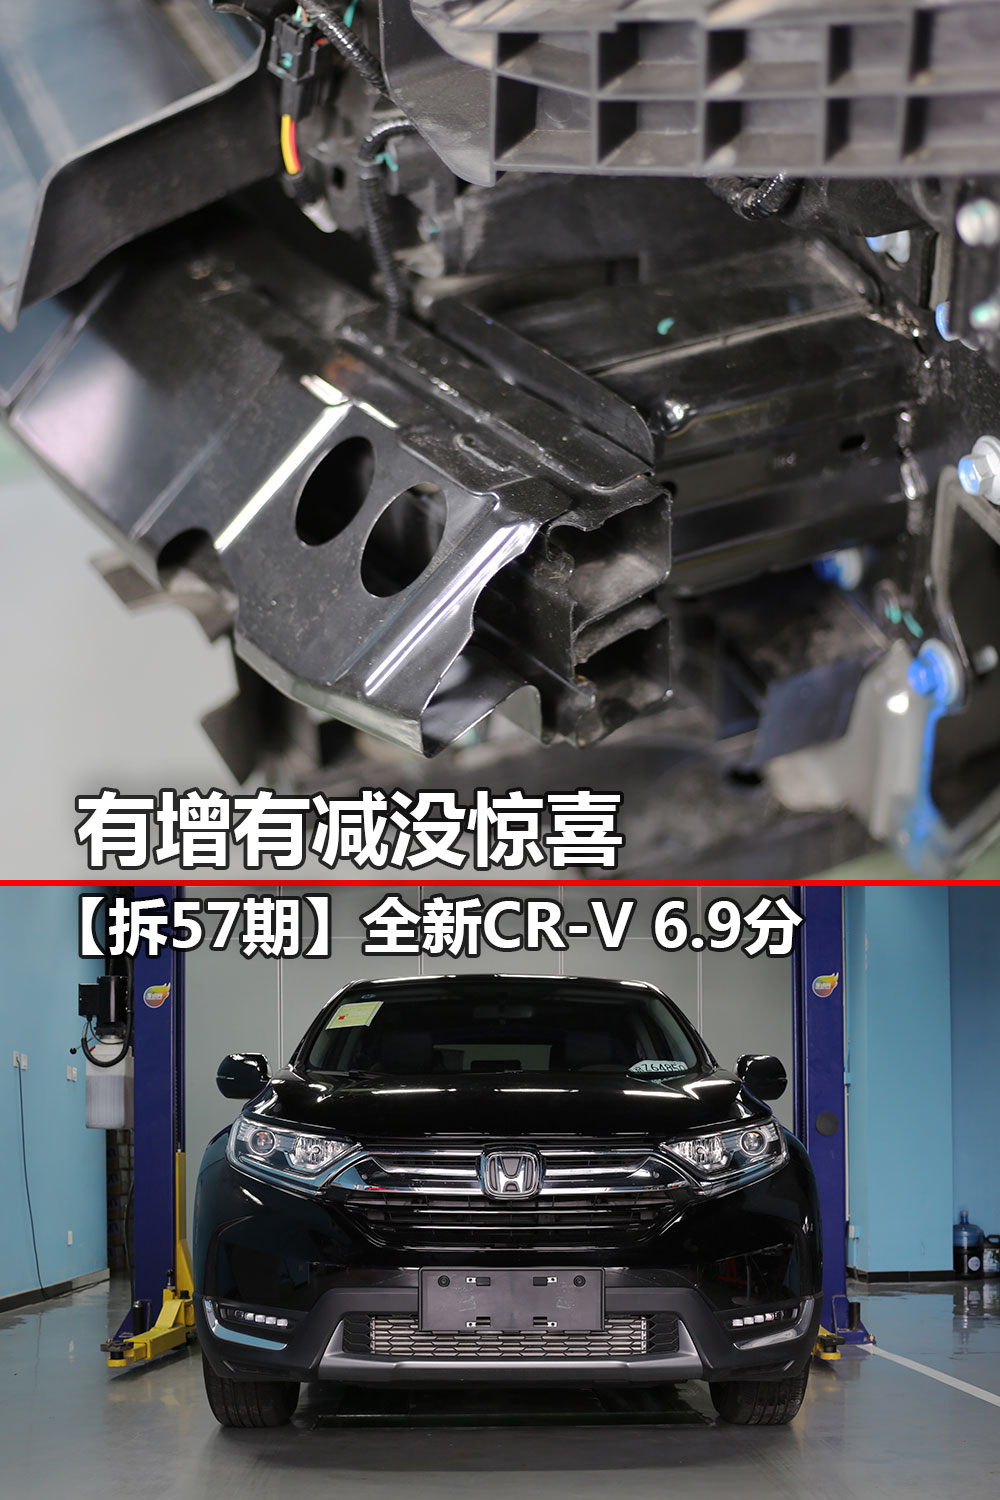 There are not many enhancements, there are many reductions, and the new CR-V dismantling performance makes people look